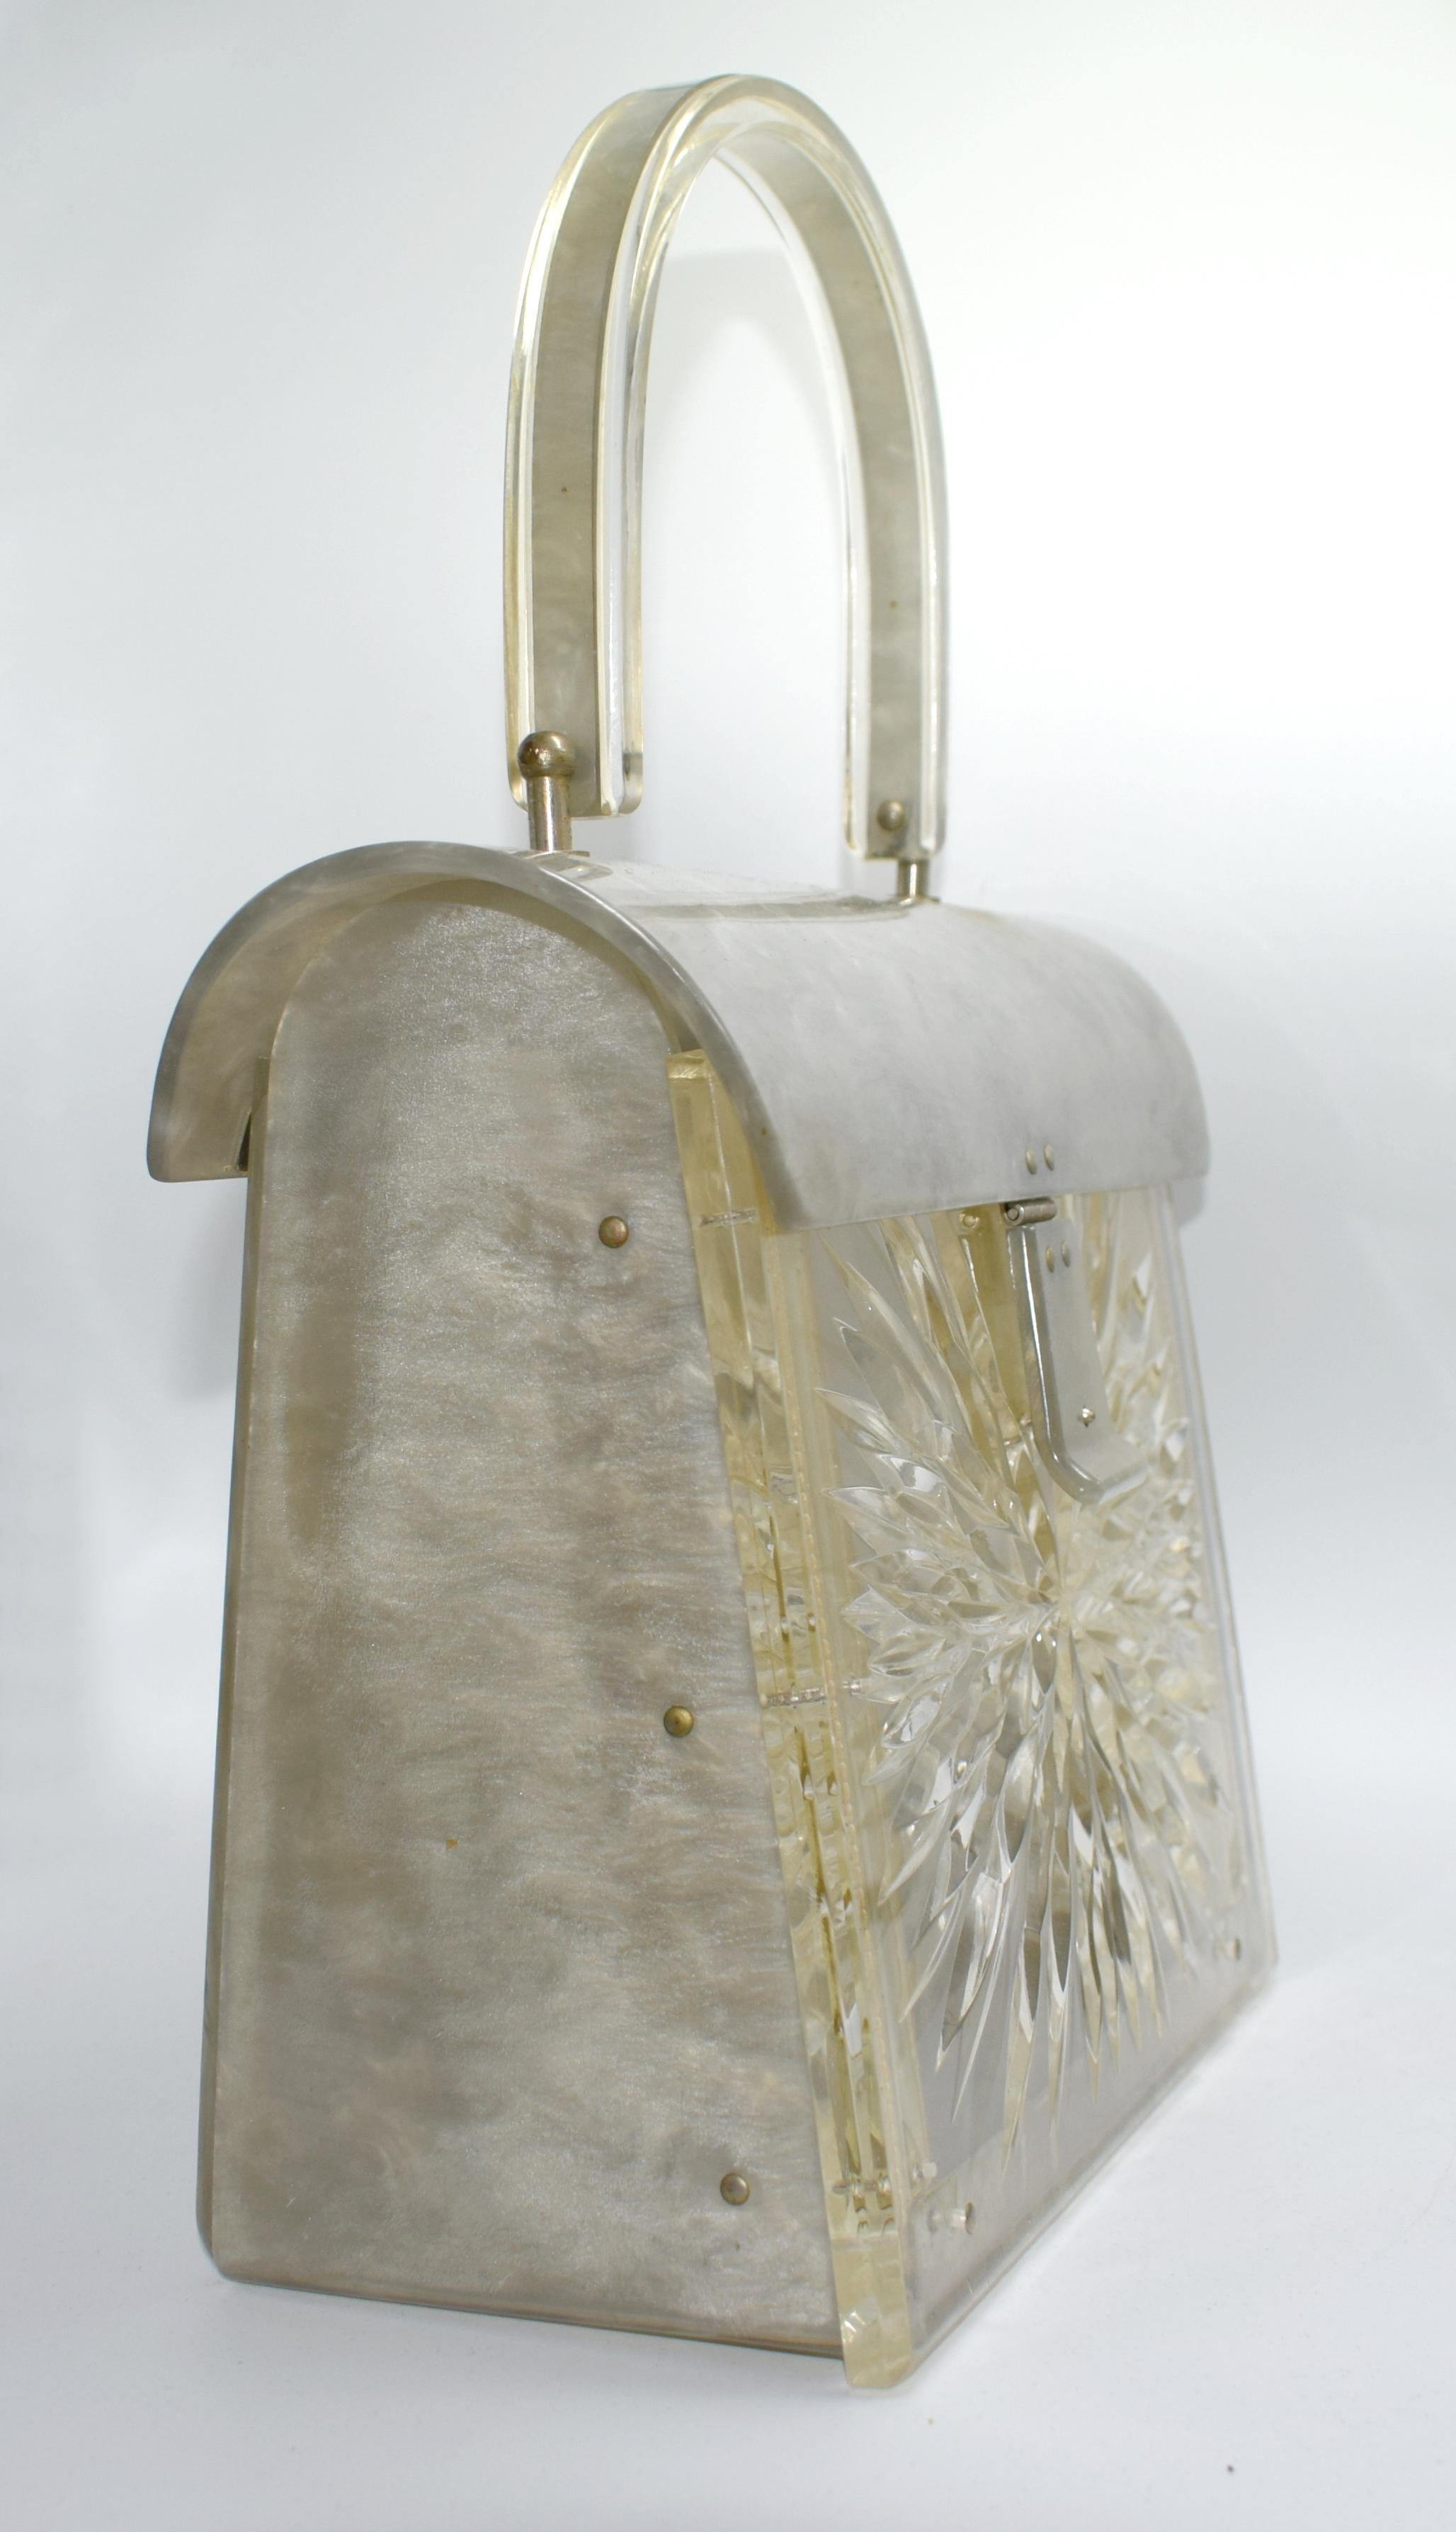 Gilli of New York (marked on hinge) 1950s Lucite box bag with heavily carved front panel with single carrying handle. The domed lid opens to reveal a generously sized interior with an extending front panel to give easier access. A great vintage